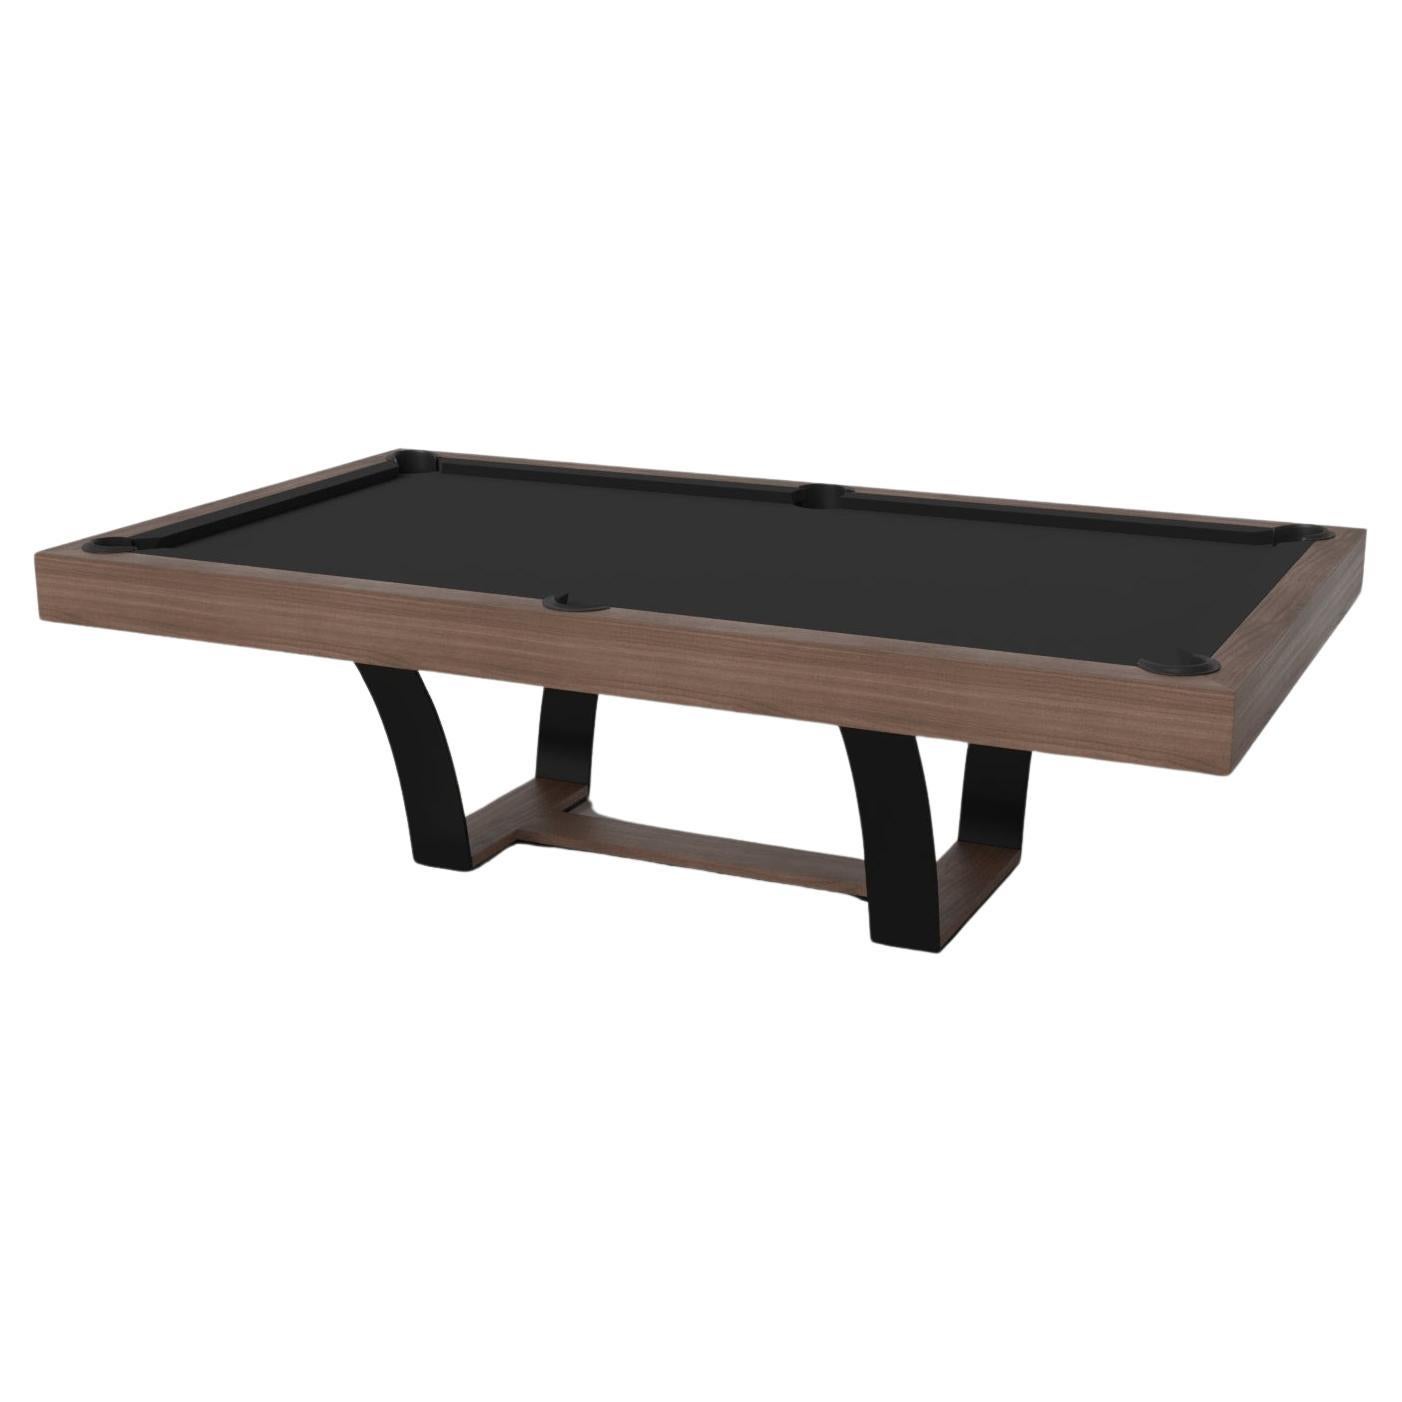 Elevate Customs Elite Pool Table / Solid Walnut Wood in 8.5' - Made in USA For Sale